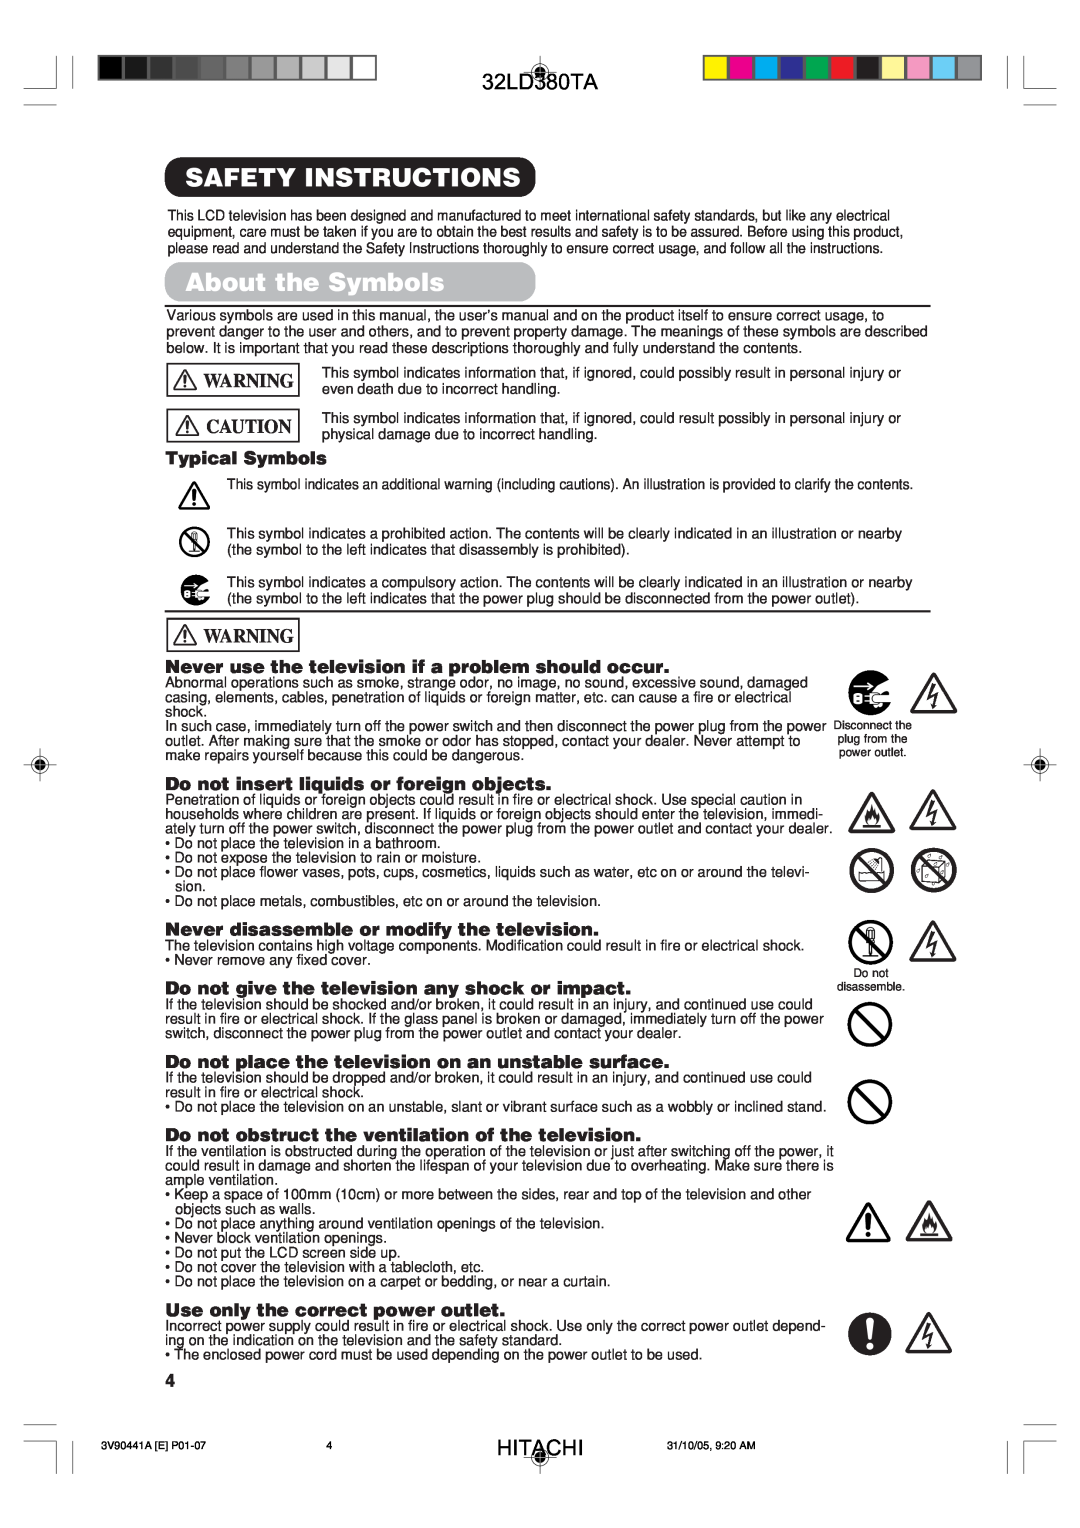 Hitachi 32LD380TA Safety Instructions, About the Symbols, Typical Symbols, Do not insert liquids or foreign objects 